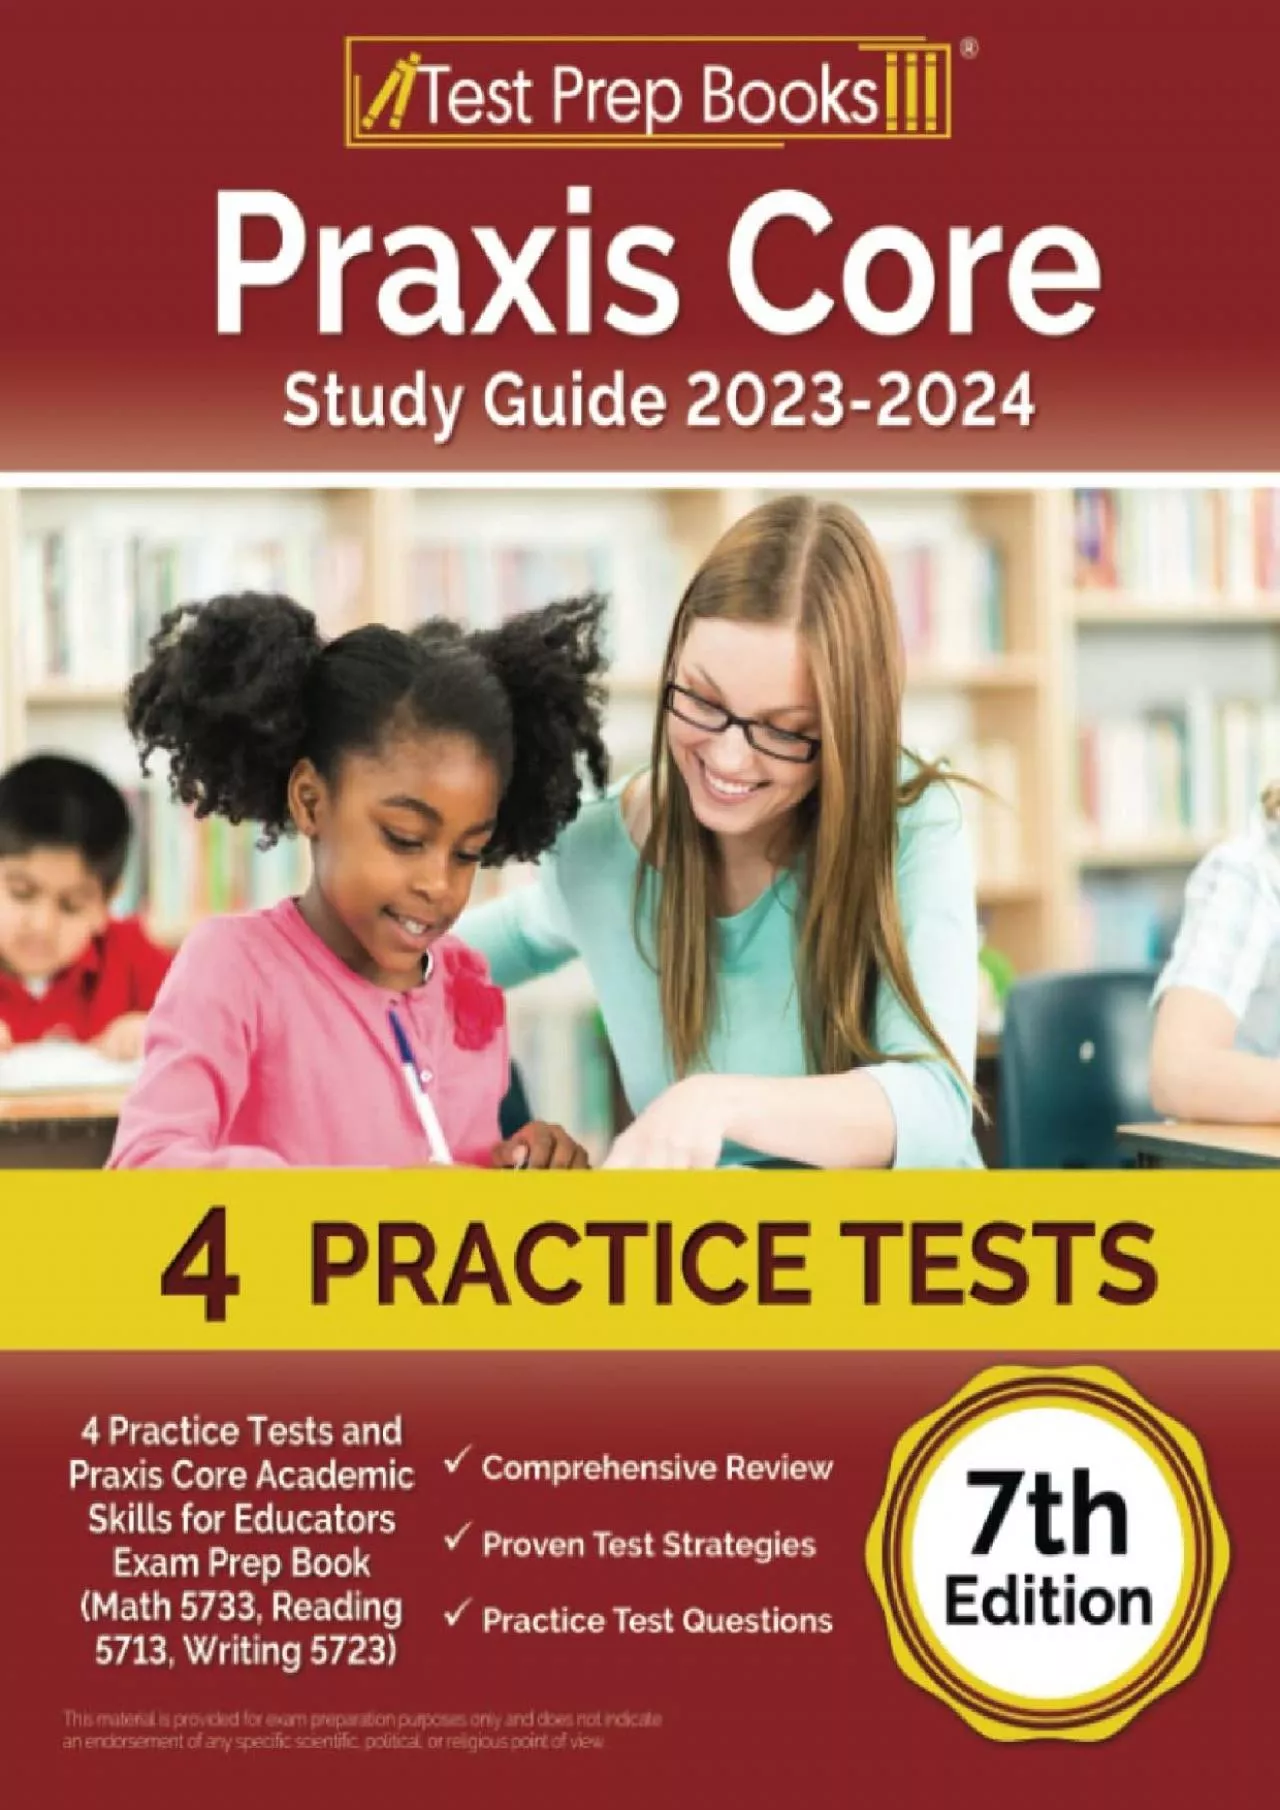 [EBOOK] Praxis Core Study Guide 2023-2024: 4 Practice Tests and Praxis Core Academic Skills